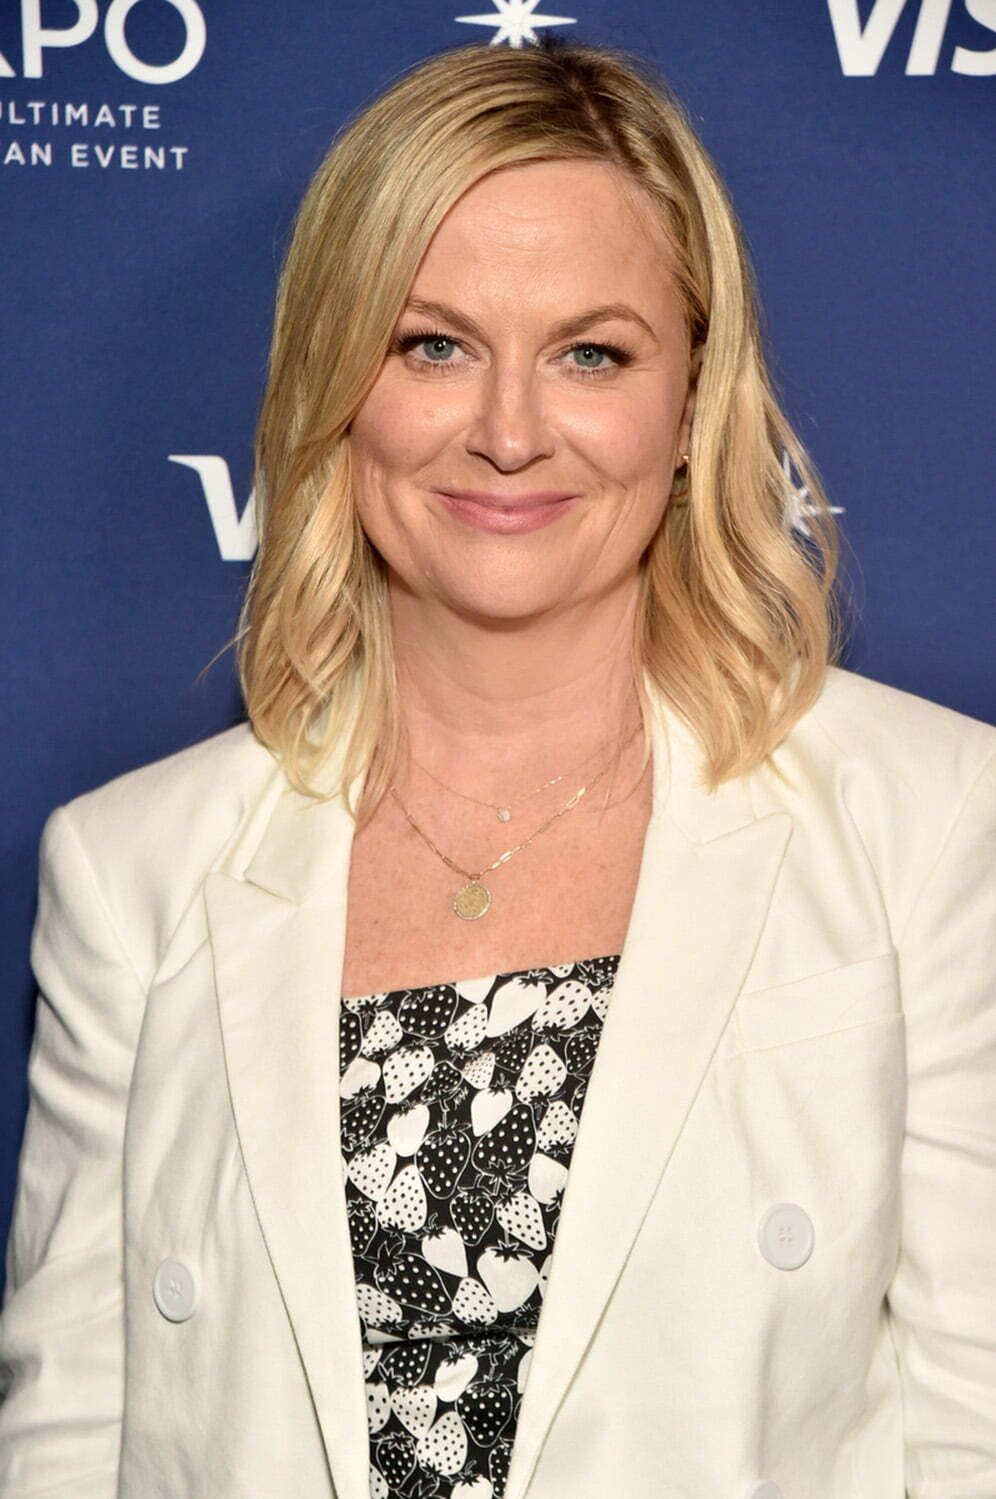 Amy Poehler attends D23 Expo 2022 at Anaheim Convention Center in Anaheim, California on September 09, 2022